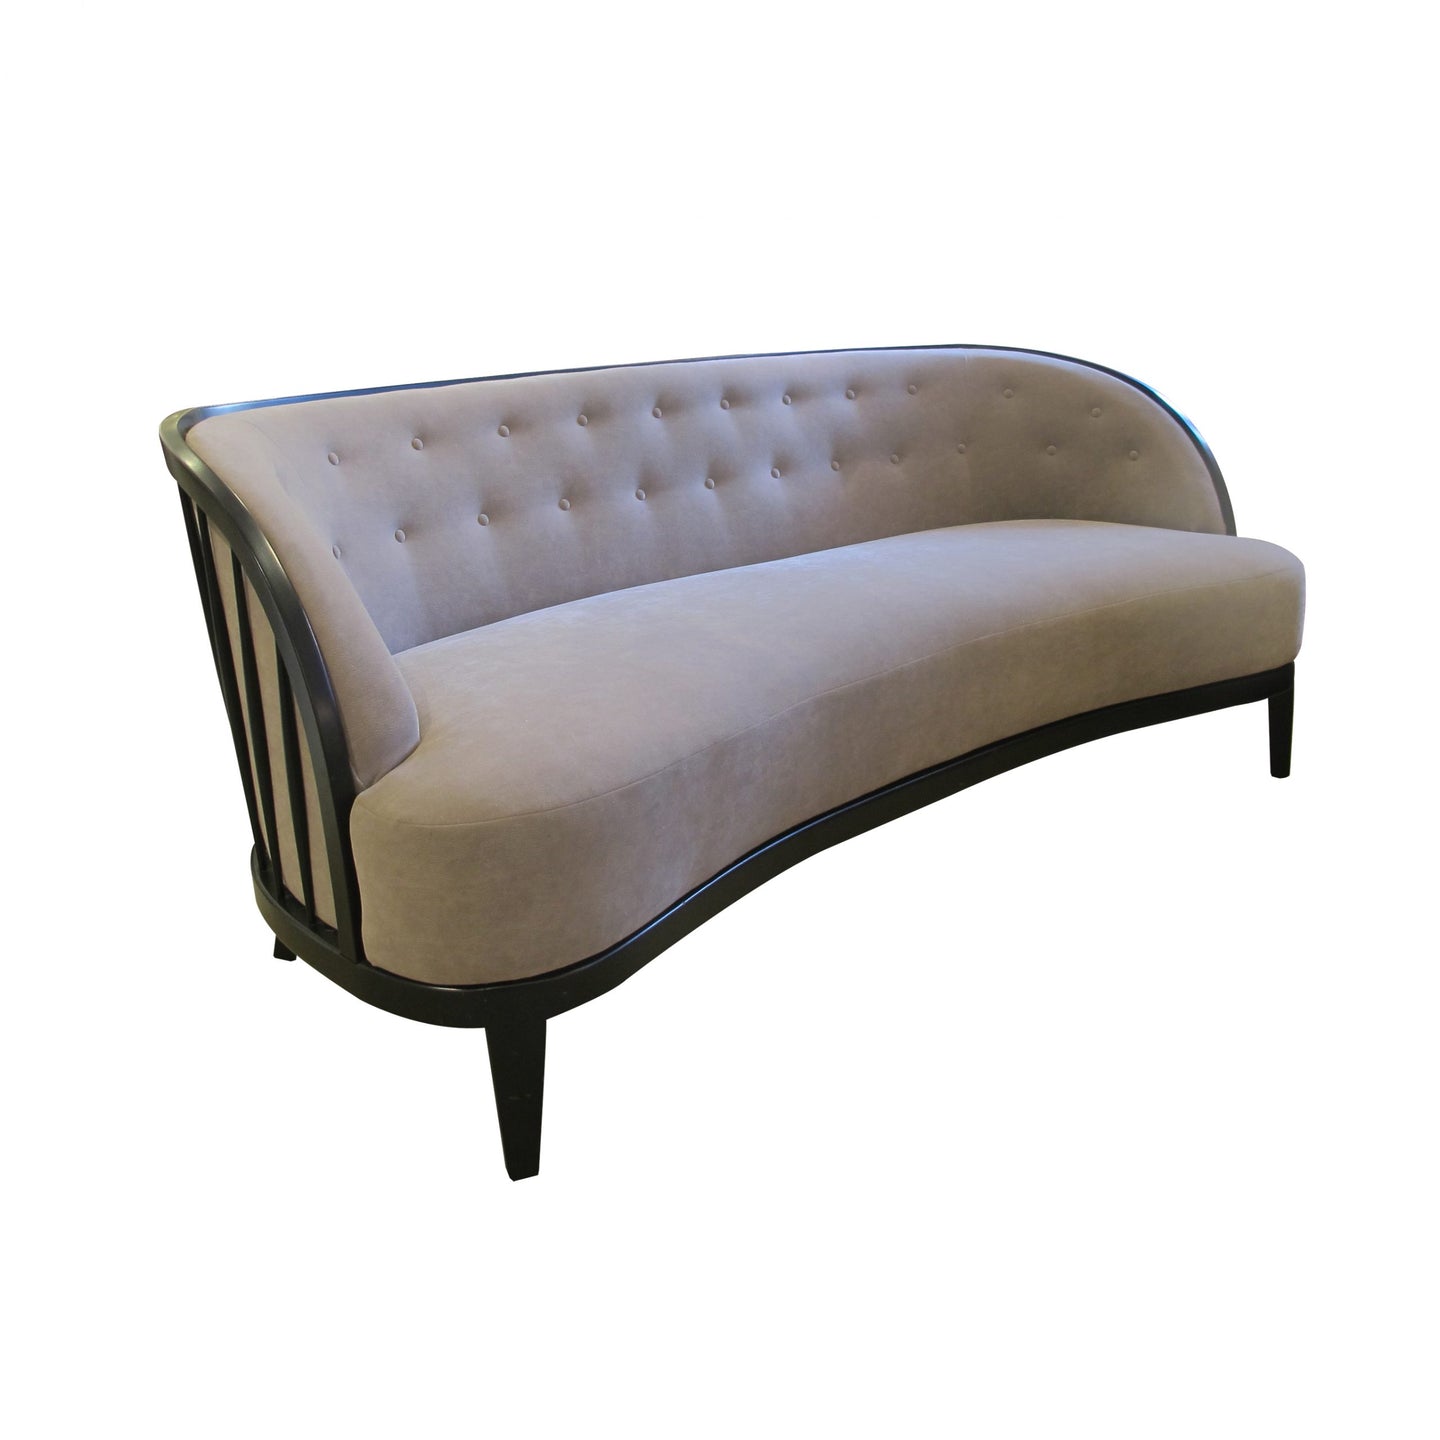 A 1940's three seater sofa with an ebonised frame